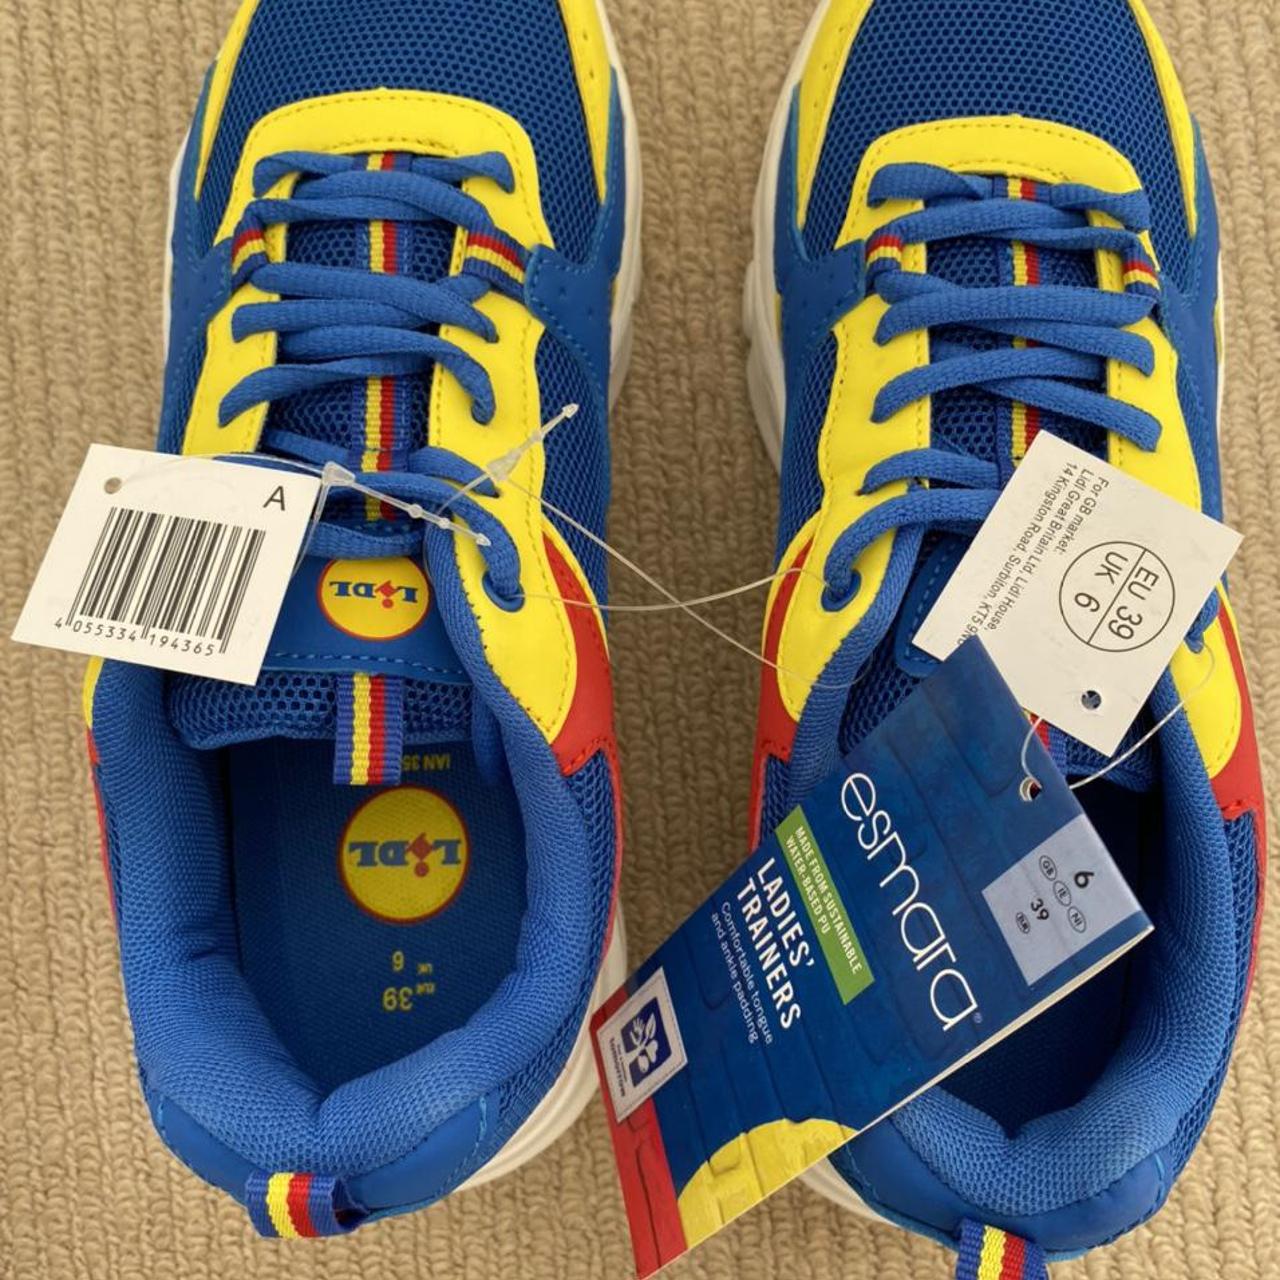 UK 6.5 (EU 40)) Lidl Trainers Shoes Sneakers NWT Eye Catching on OnBuy